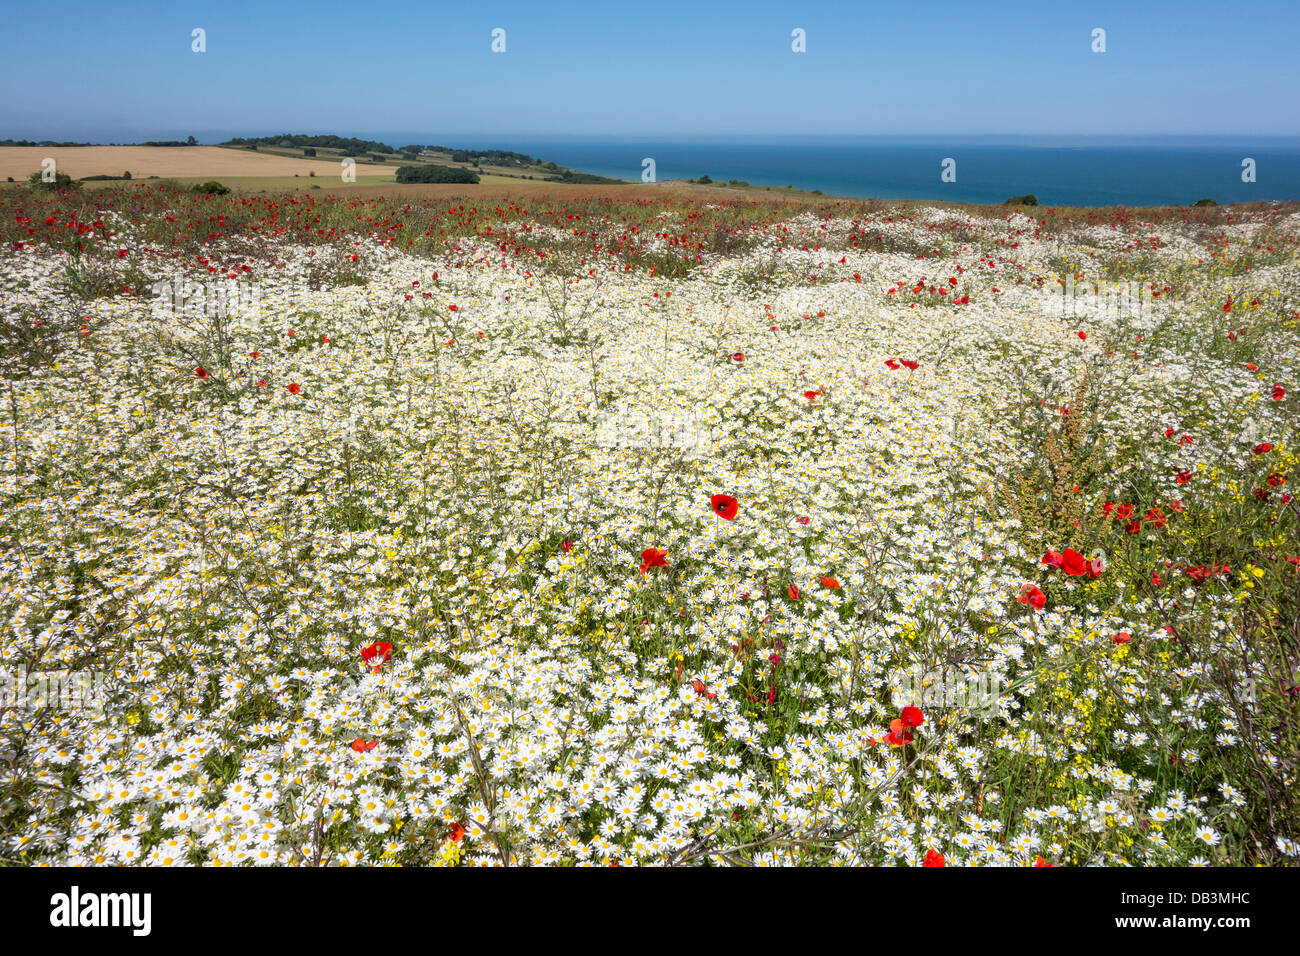 Field of white daisies and red poppies Clifftop View Stock Photo